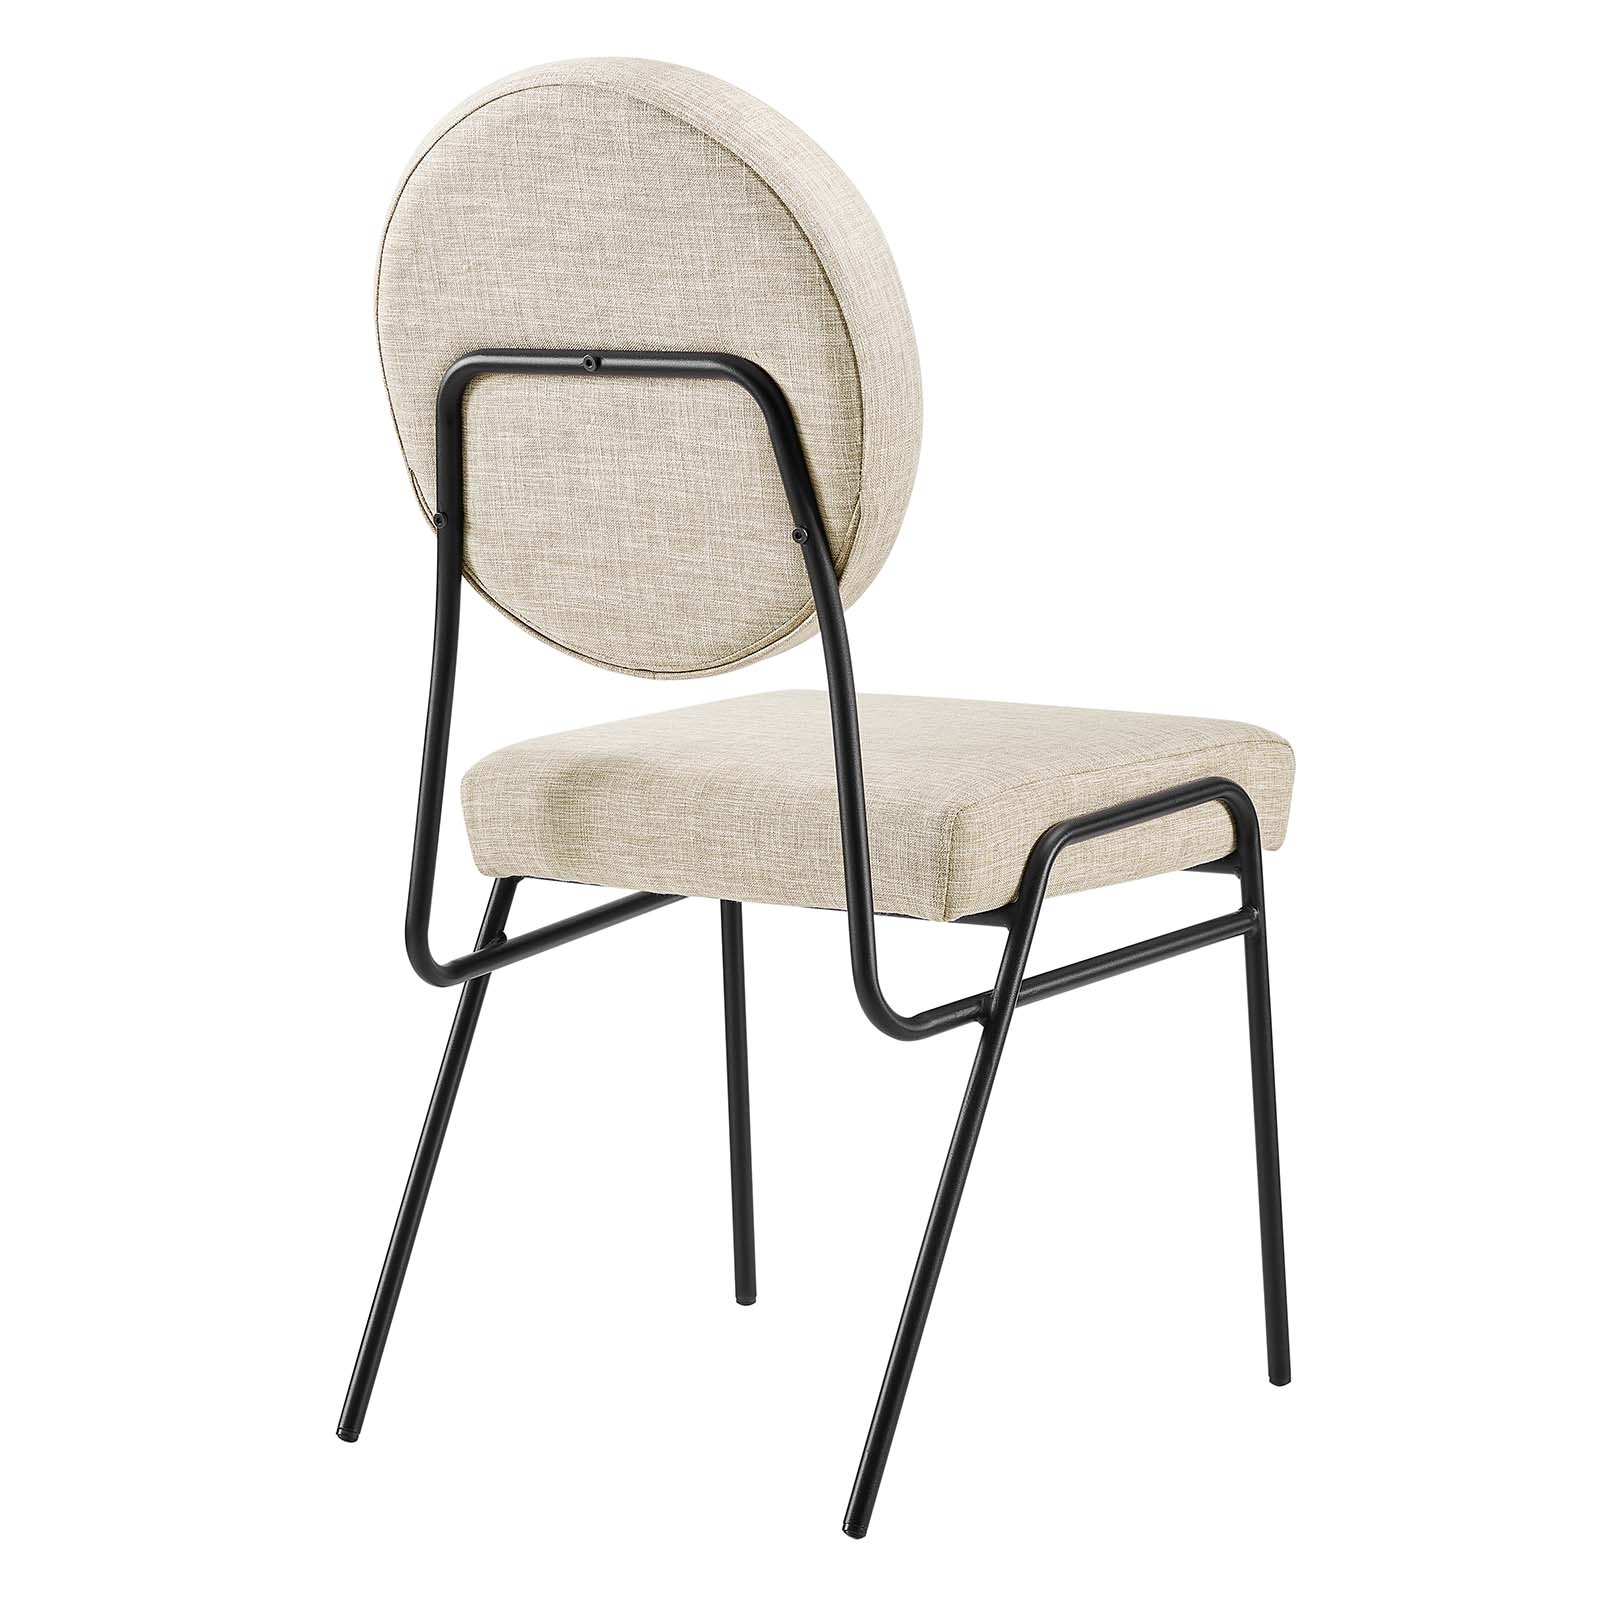 Craft Upholstered Fabric Dining Side Chairs, Black Beige